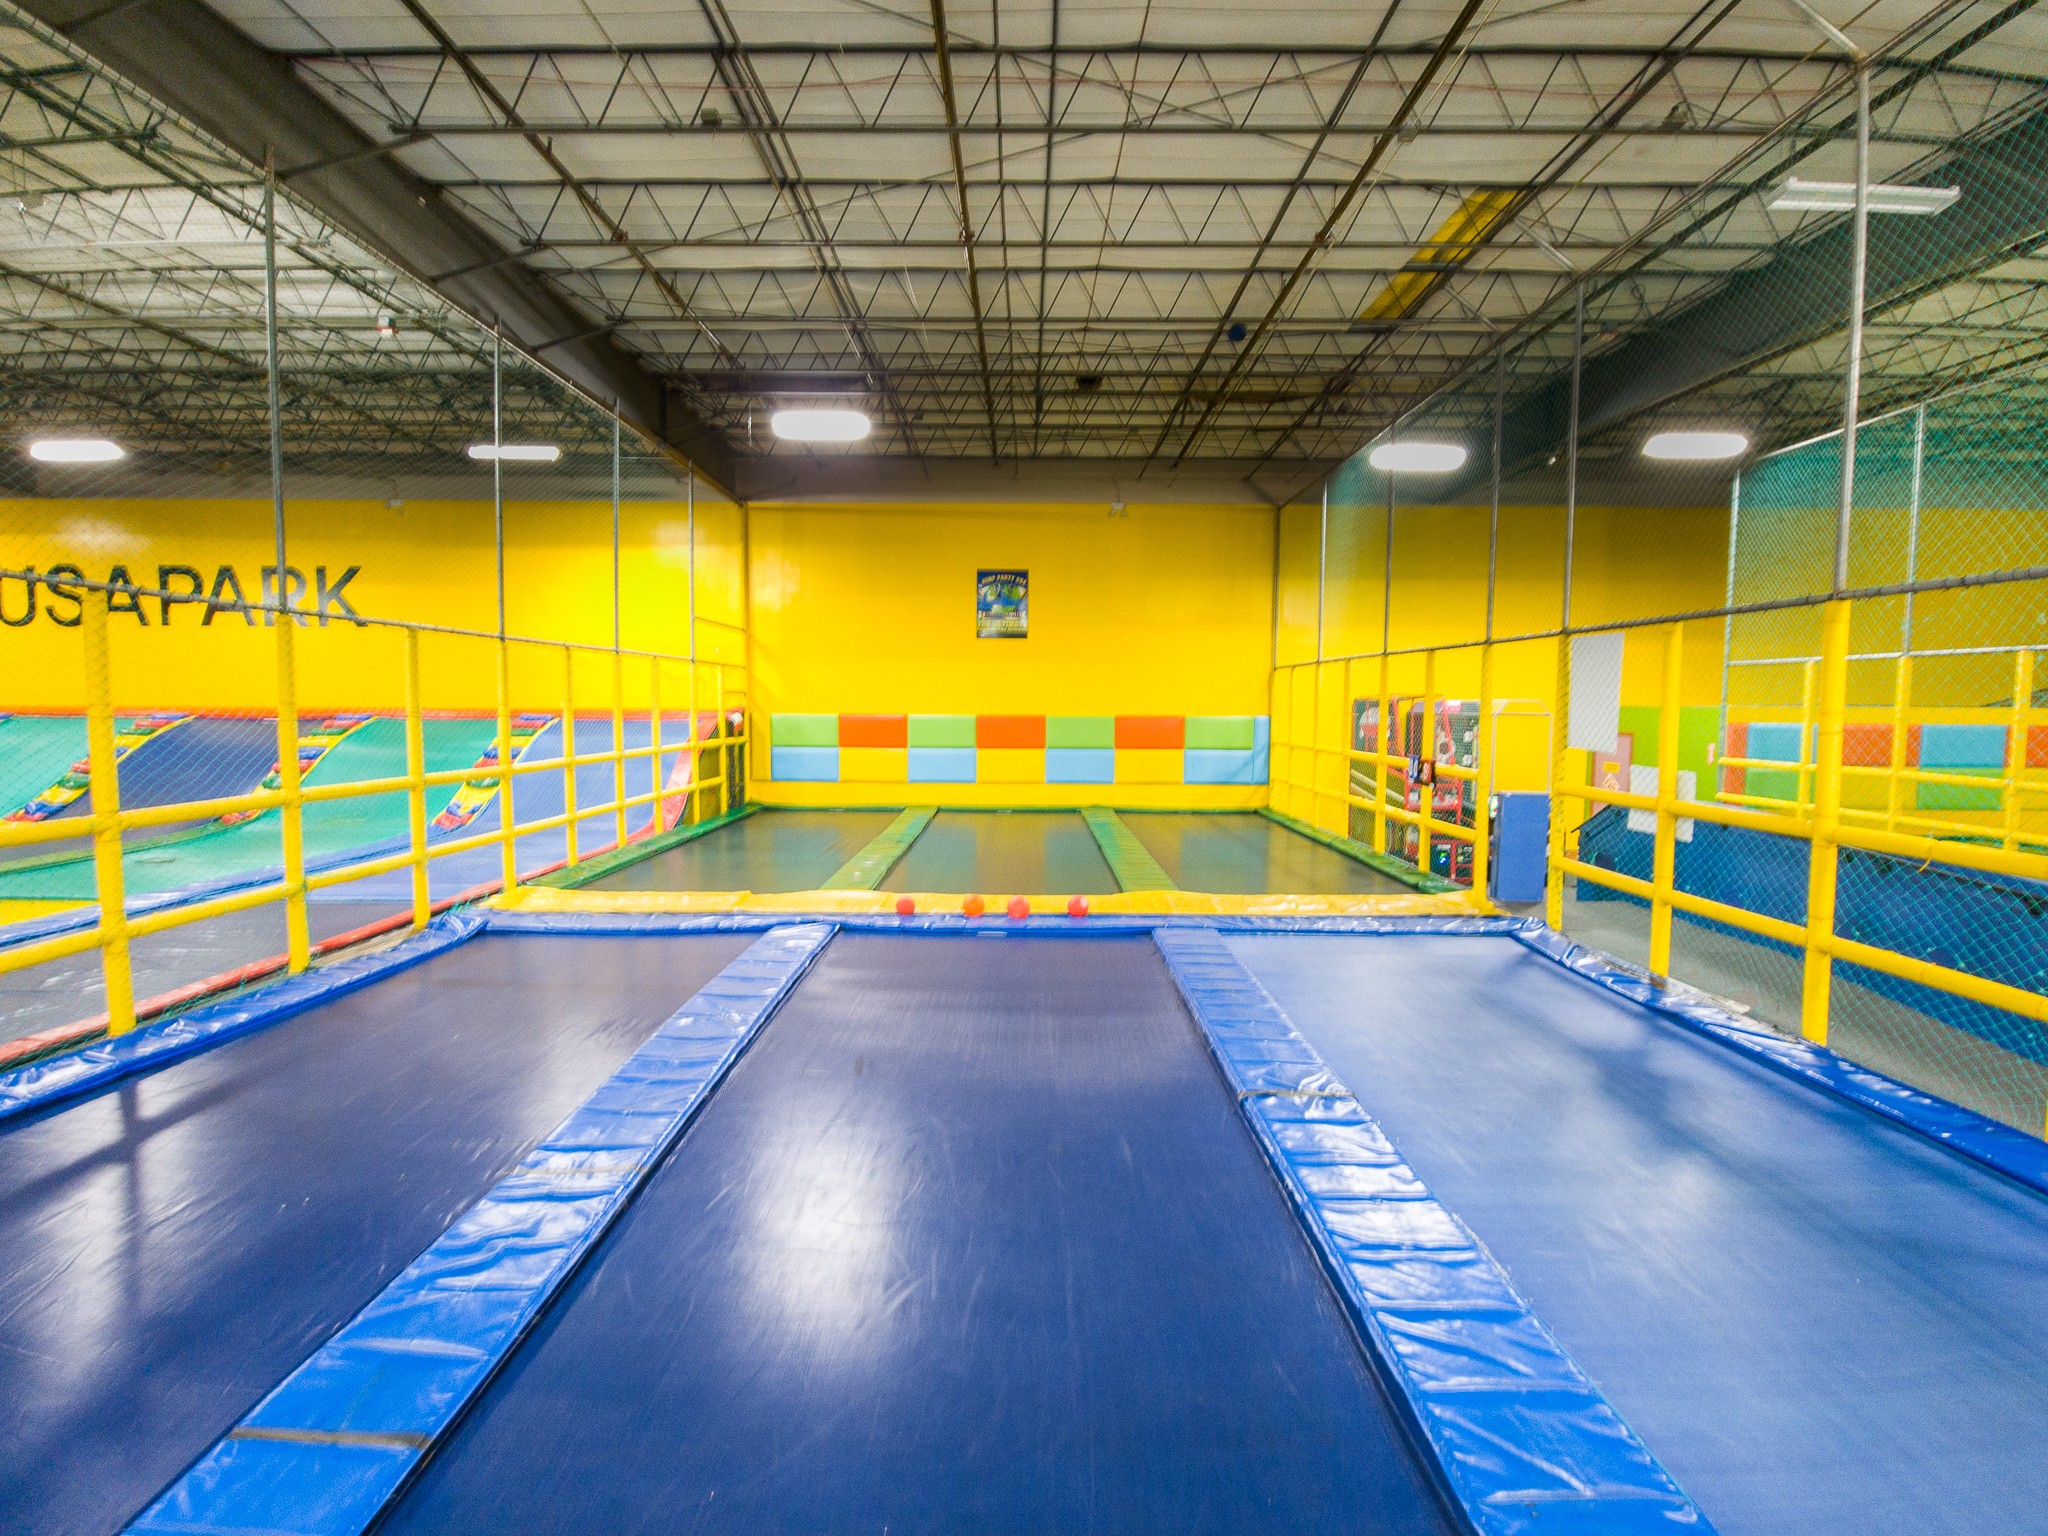 Jump Party USA has two Dodge Ball courts. Each Dodge ball court is made up of six smaller trampolines and surrounded with netting to keep the balls from flying out of the field. Perfect place for a college club social